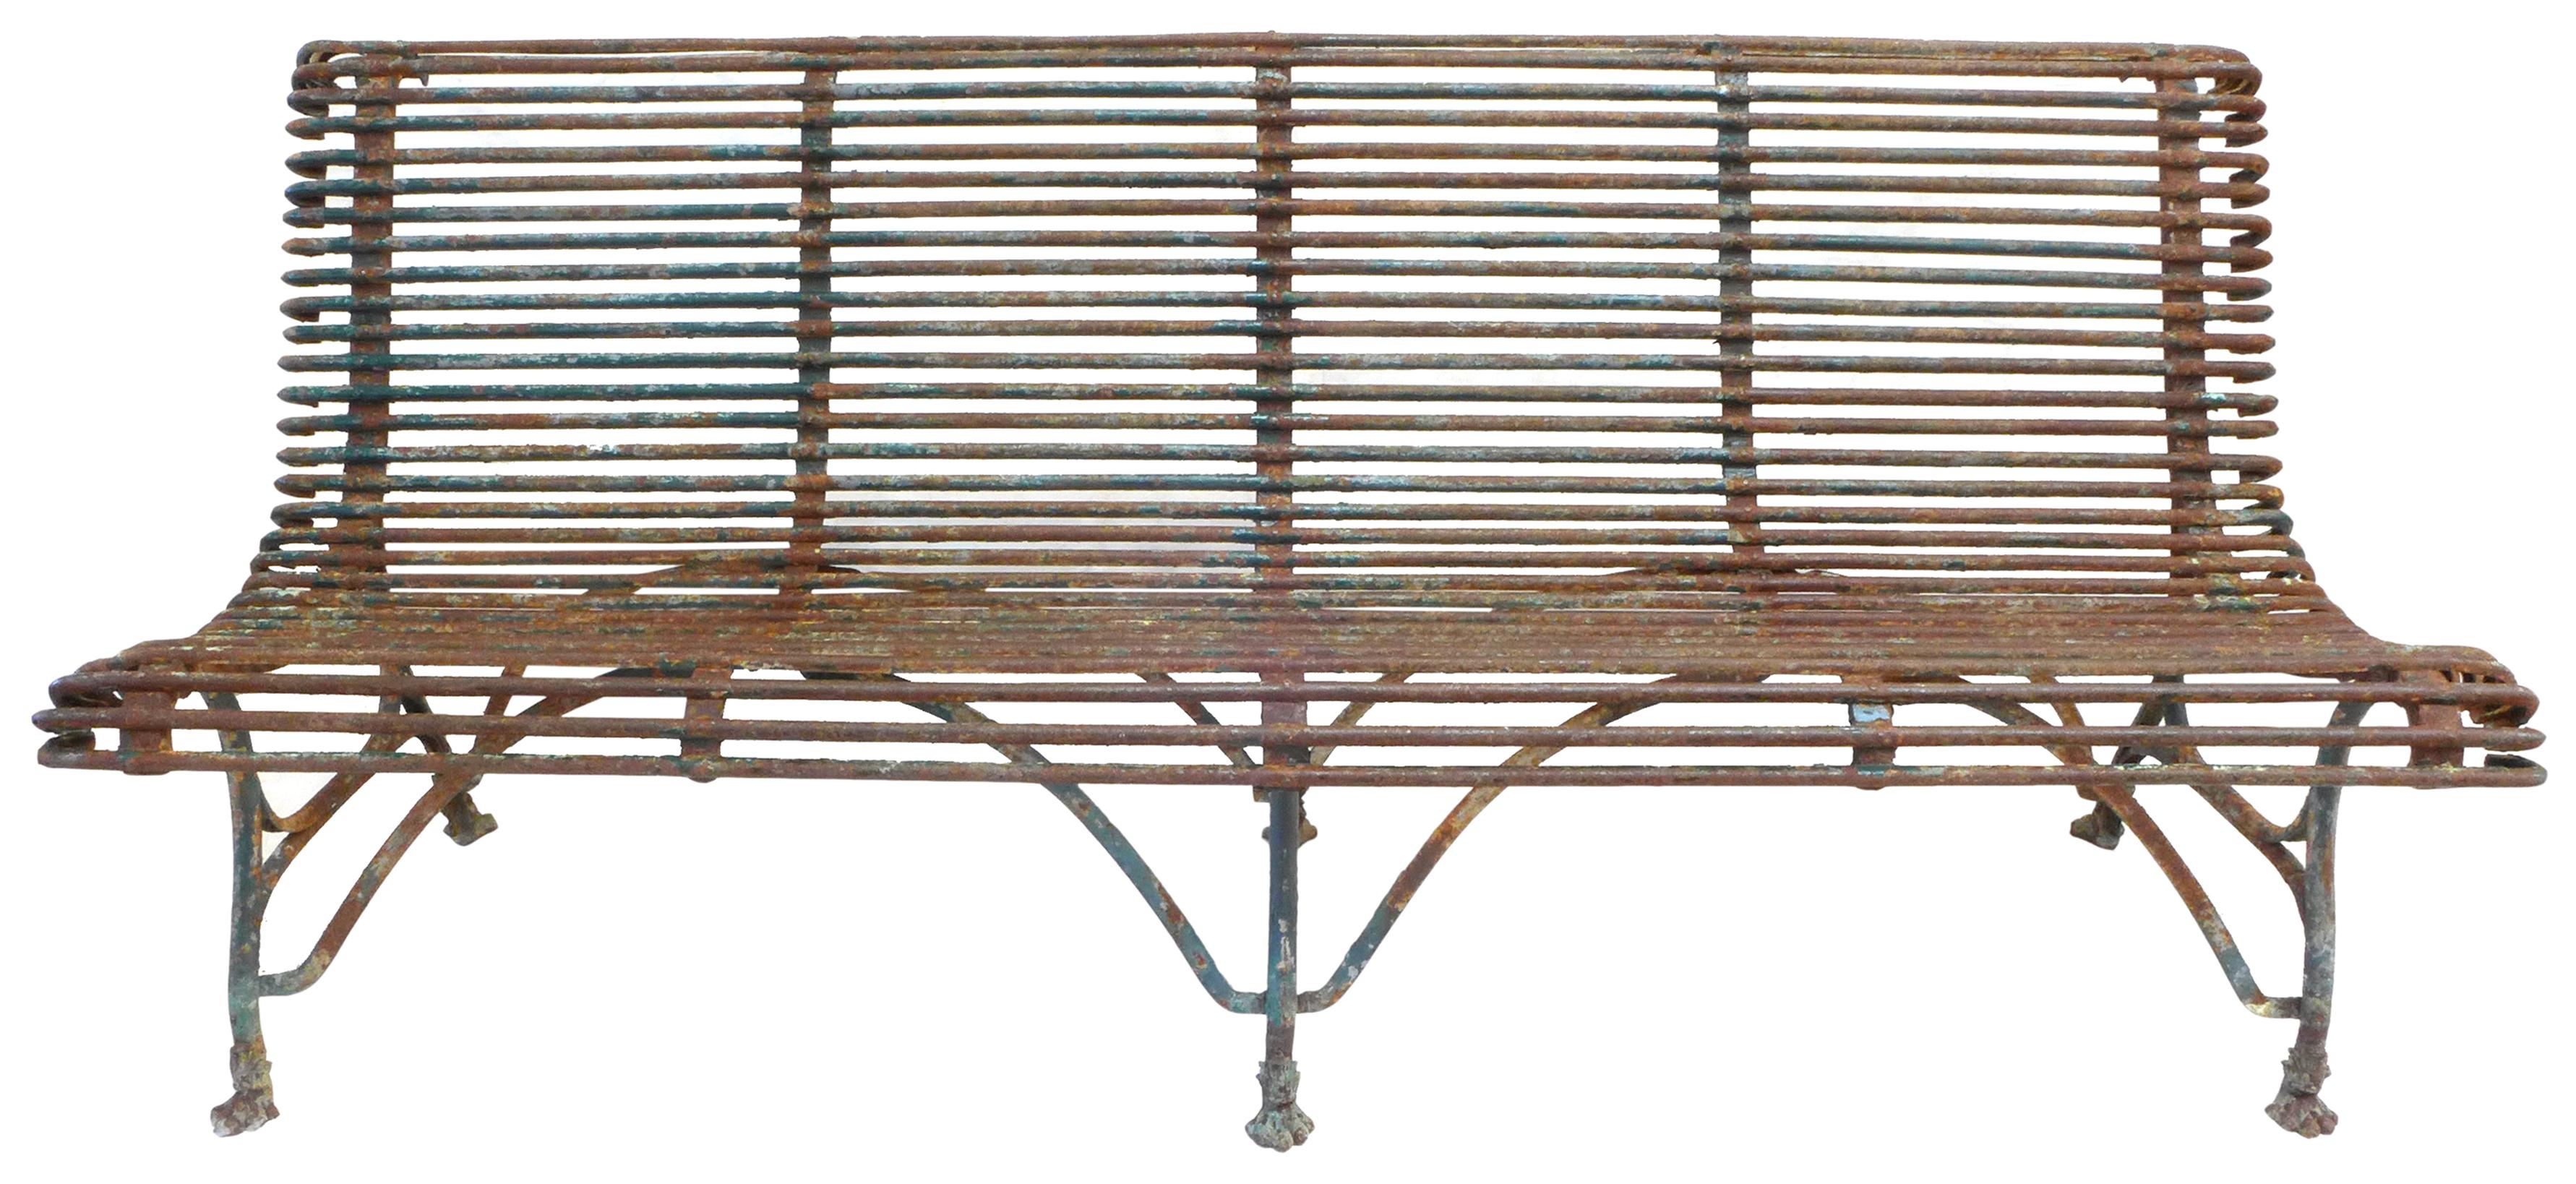 Aesthetic Movement 19th Century French Wrought Iron Arras Bench For Sale